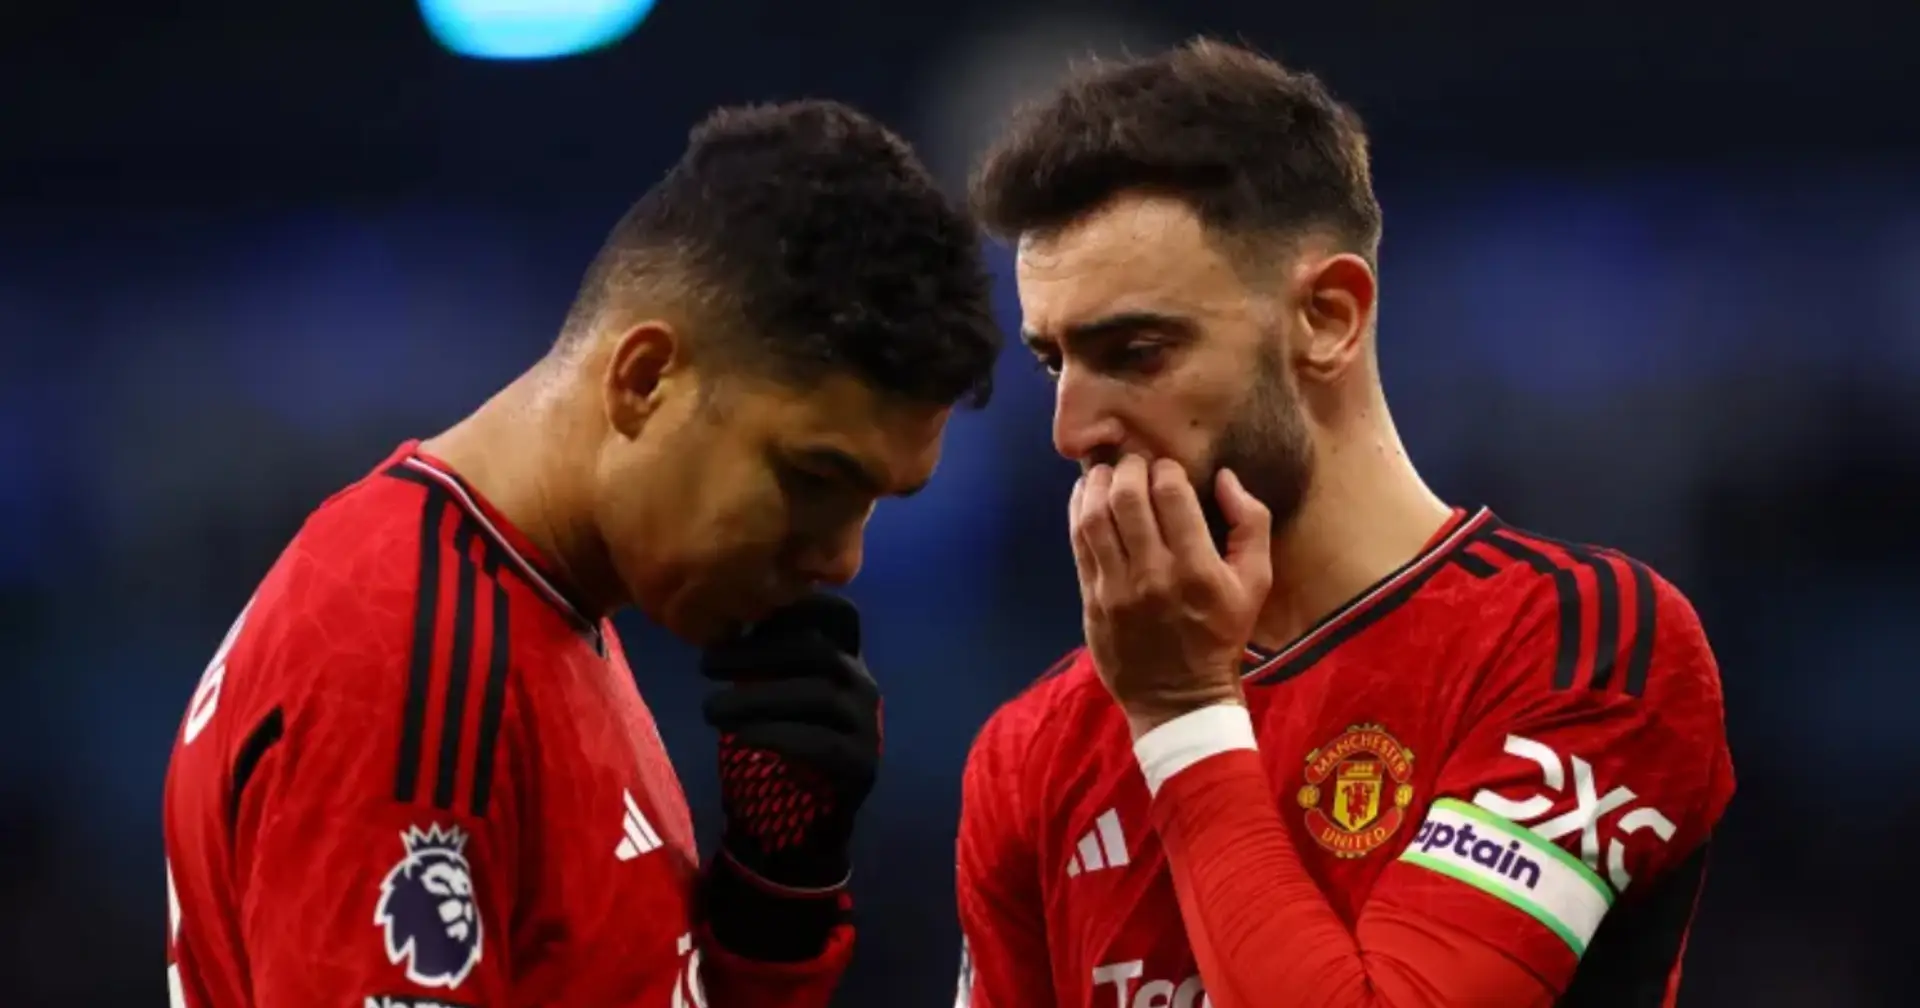 143 but no more counting: Man United's insane streak comes to a close at Etihad